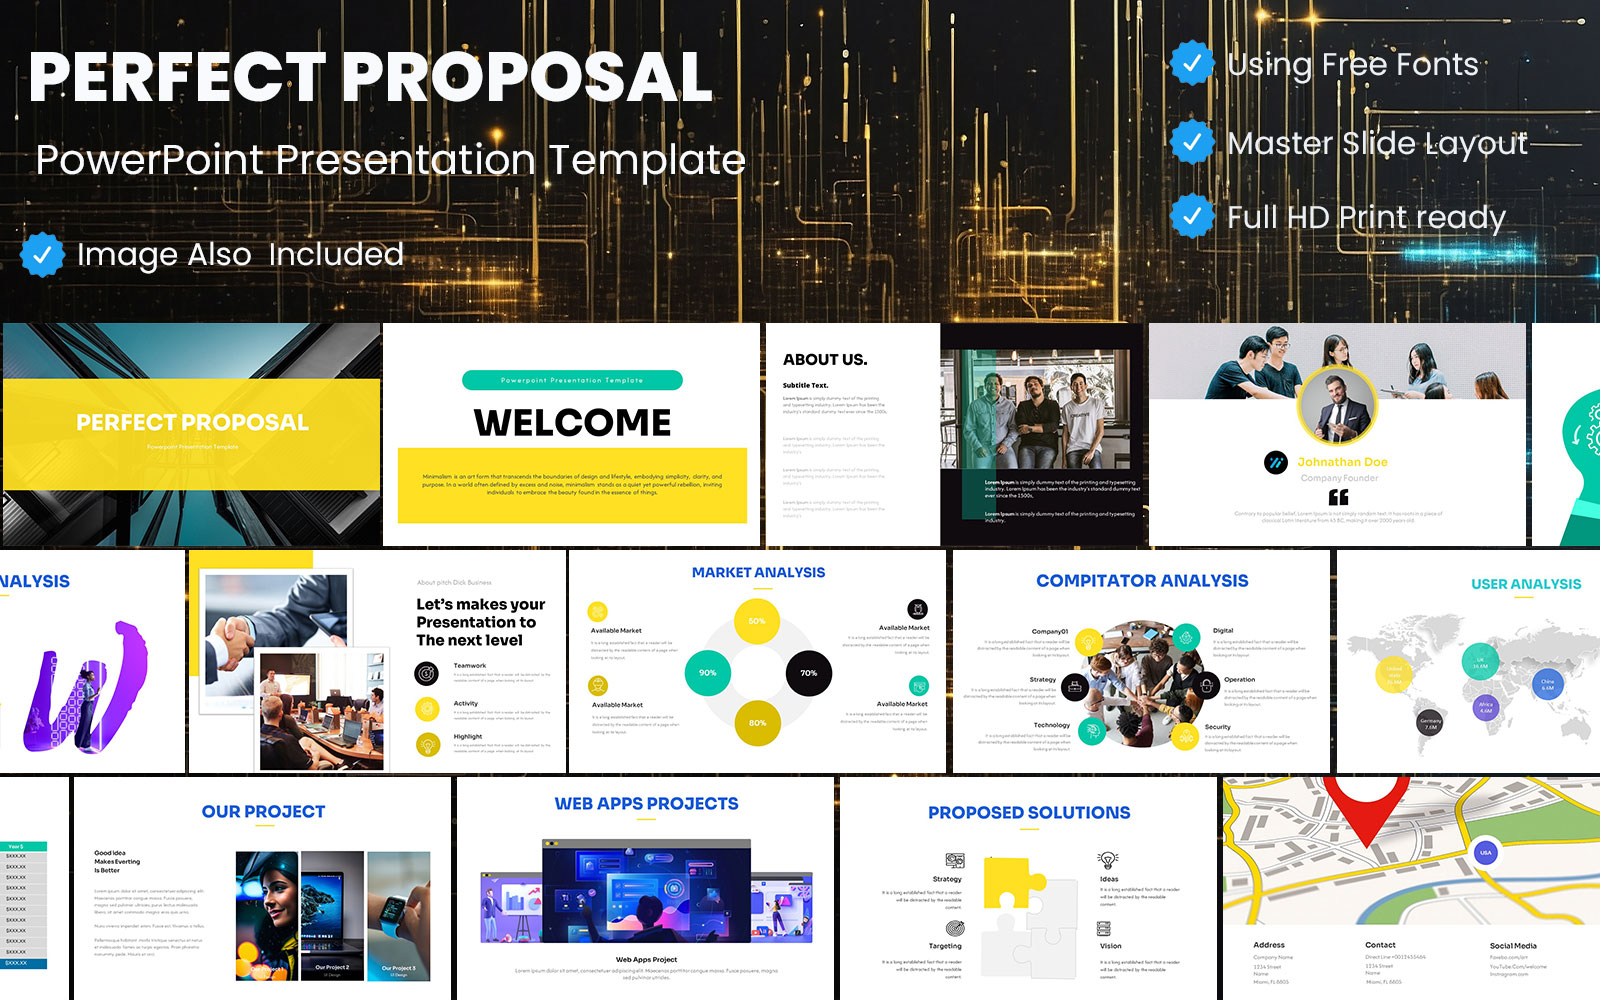 Perfect Proposal PowerPoint Presentation Template